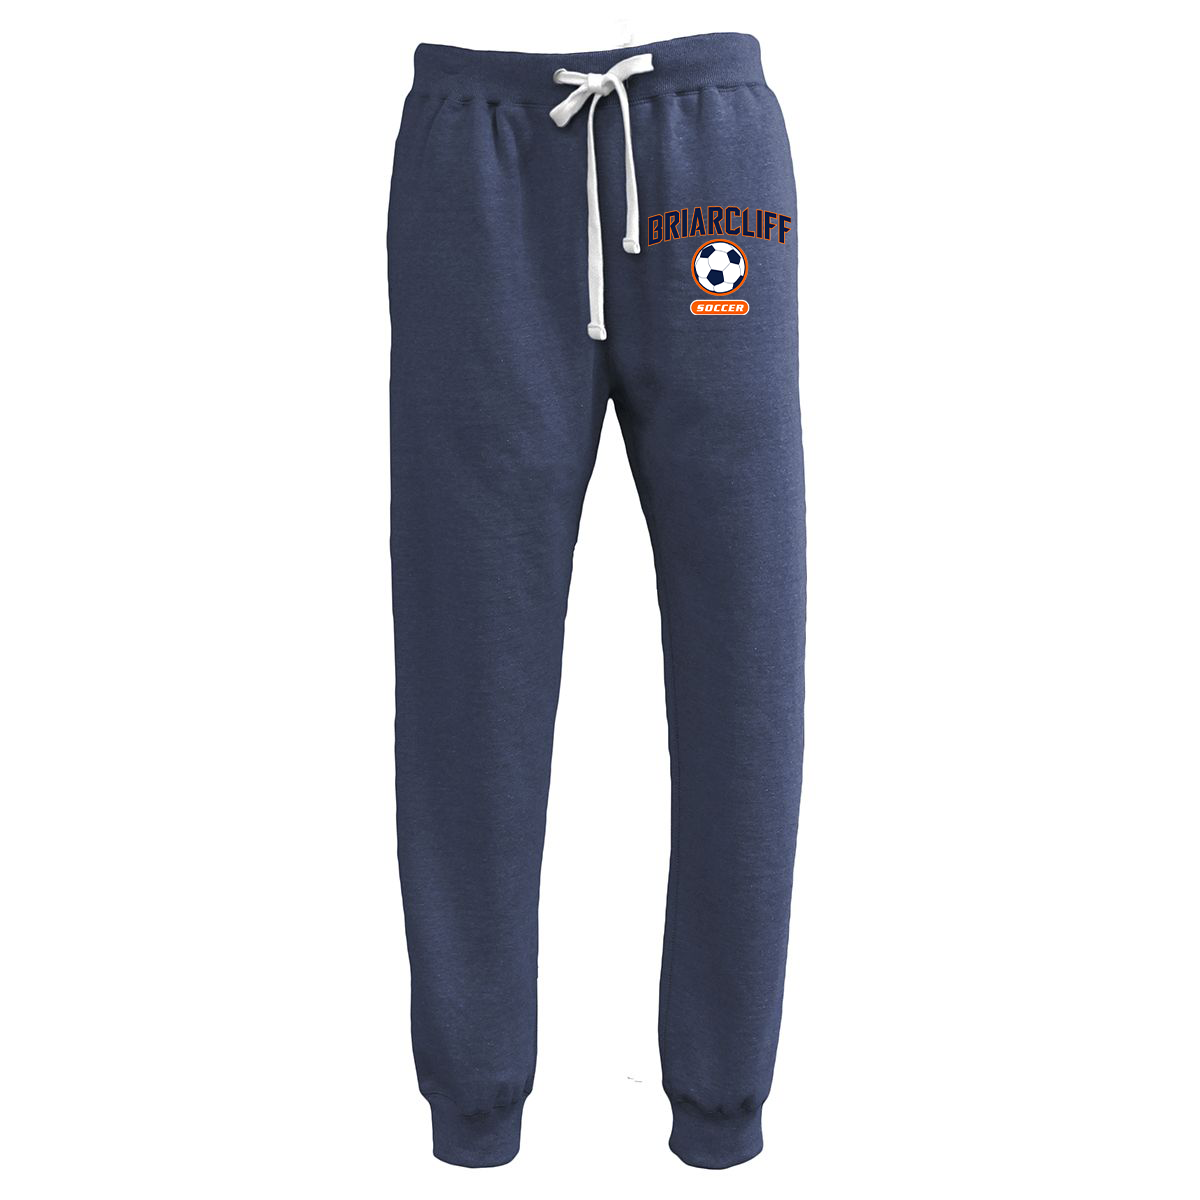 Briarcliff Soccer Joggers